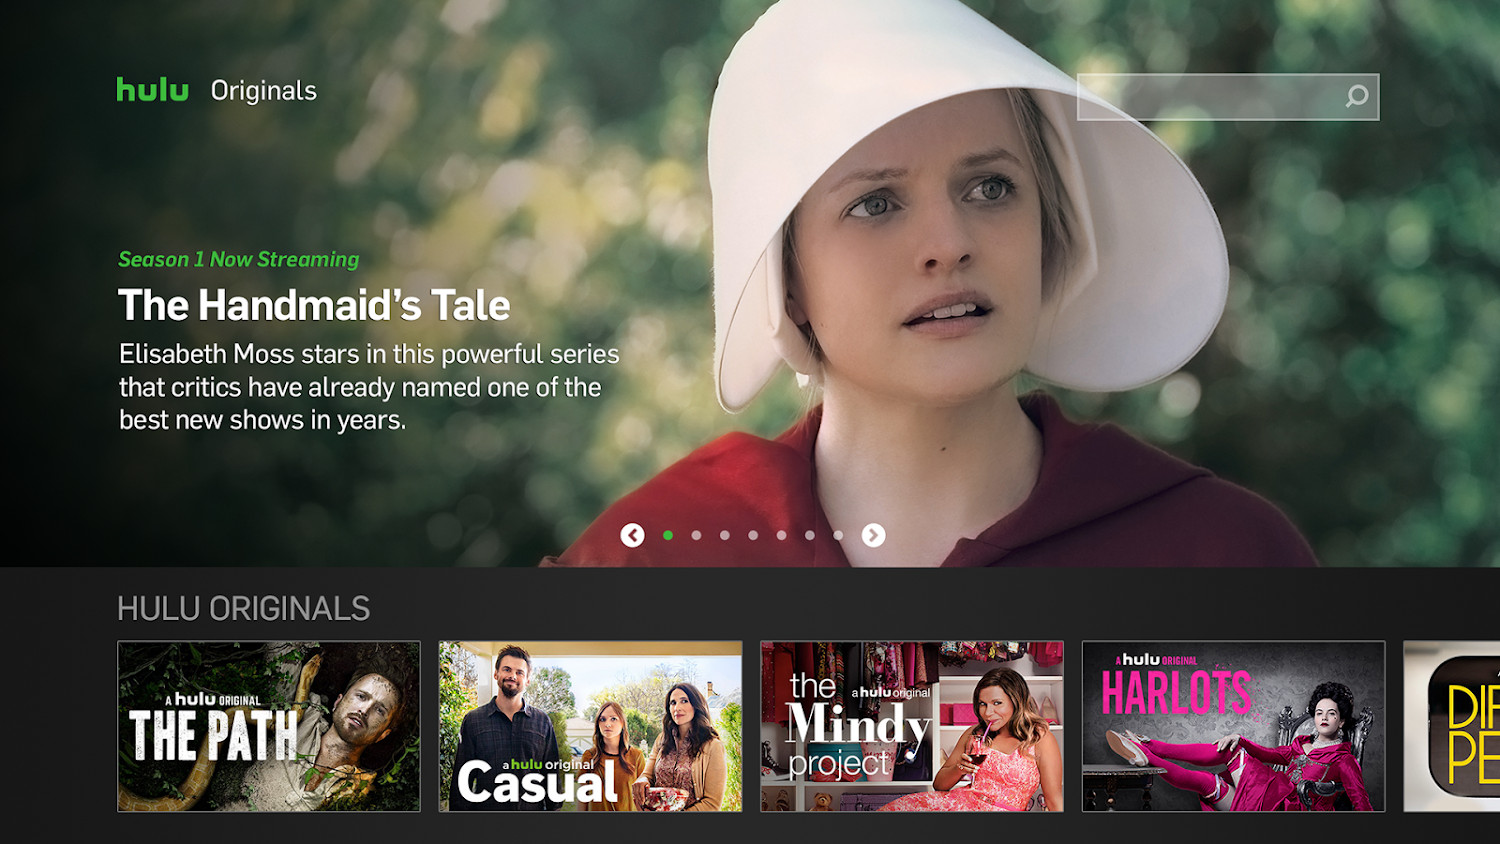 Android Tv Finally Gets The Full Hulu Experience, Including Live Tv |  Digital Trends